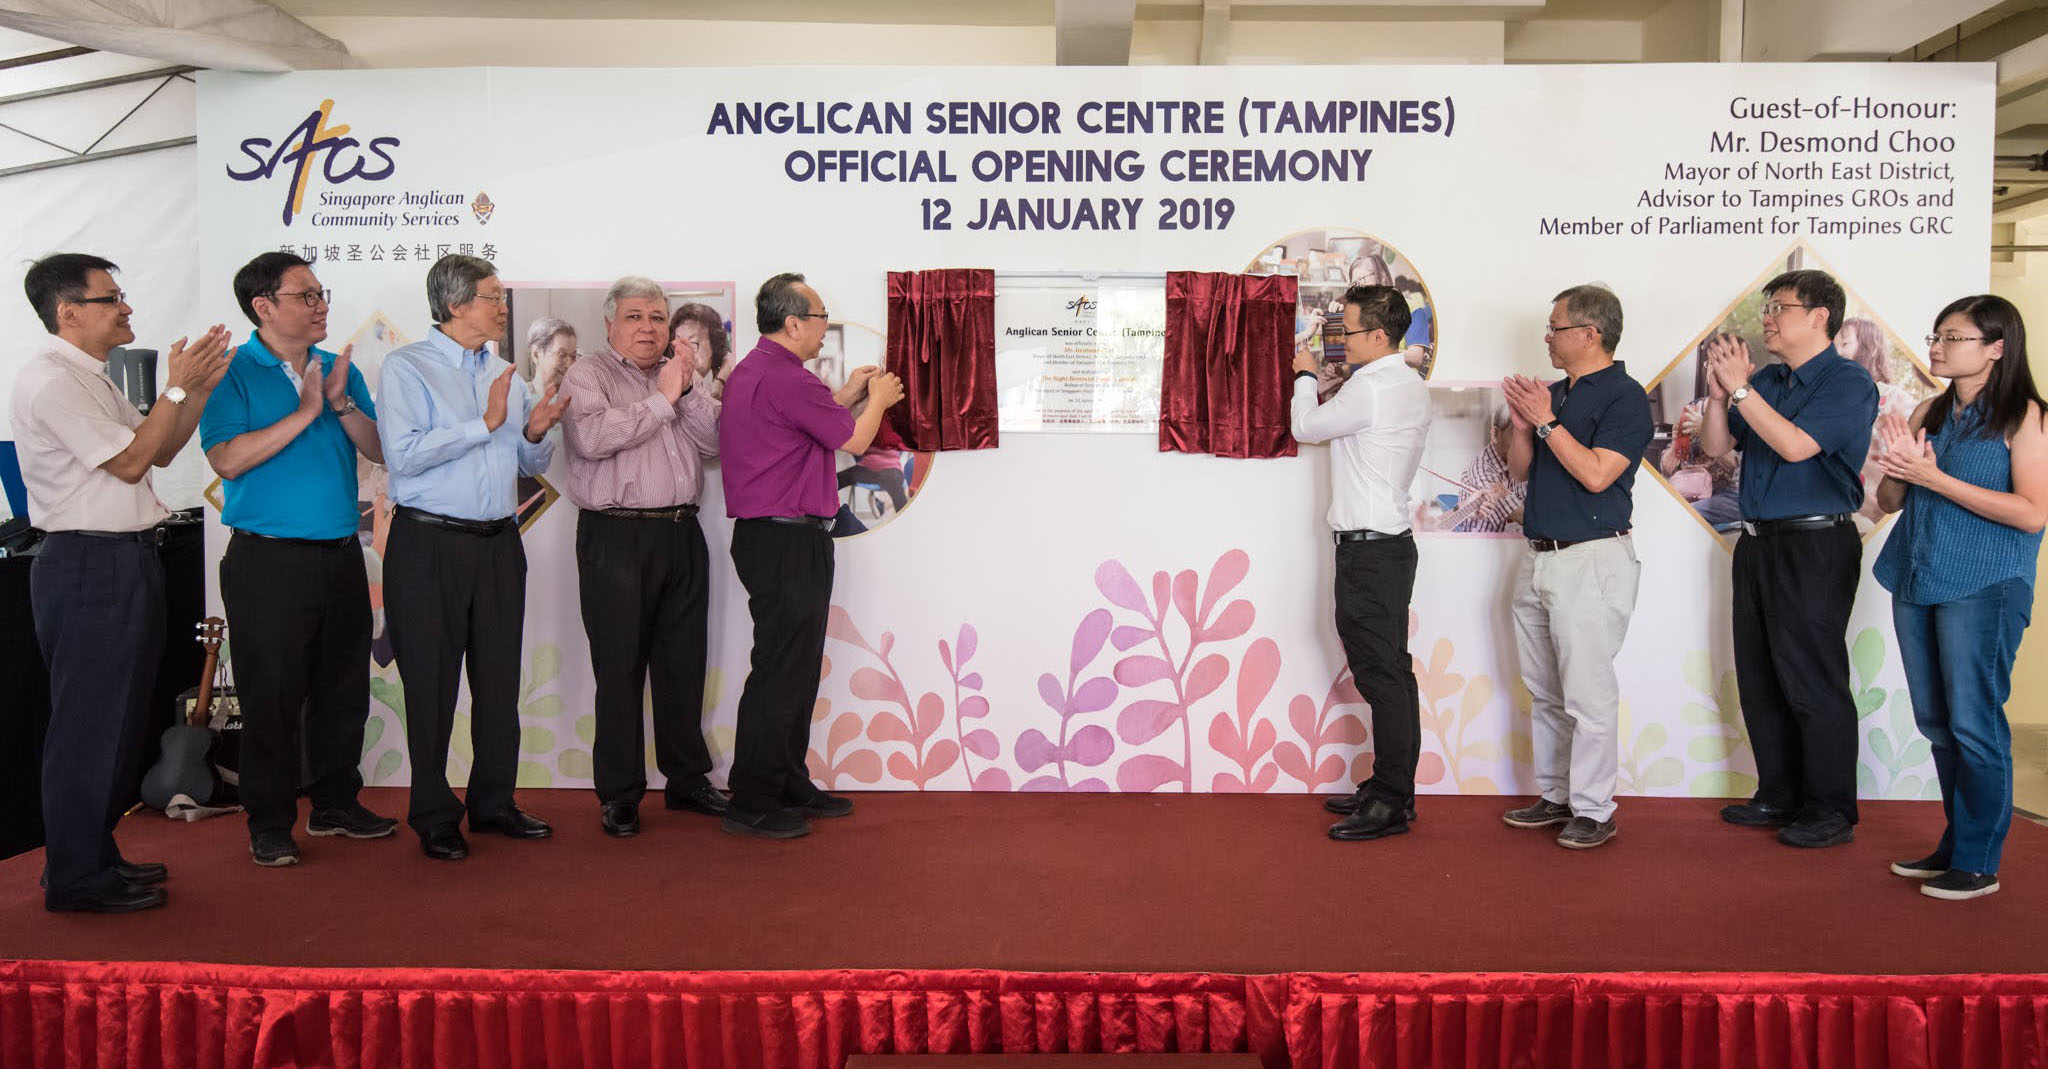 20190112_ASC_TM_Opening Official Opening of Anglican Senior Centre (Tampines)